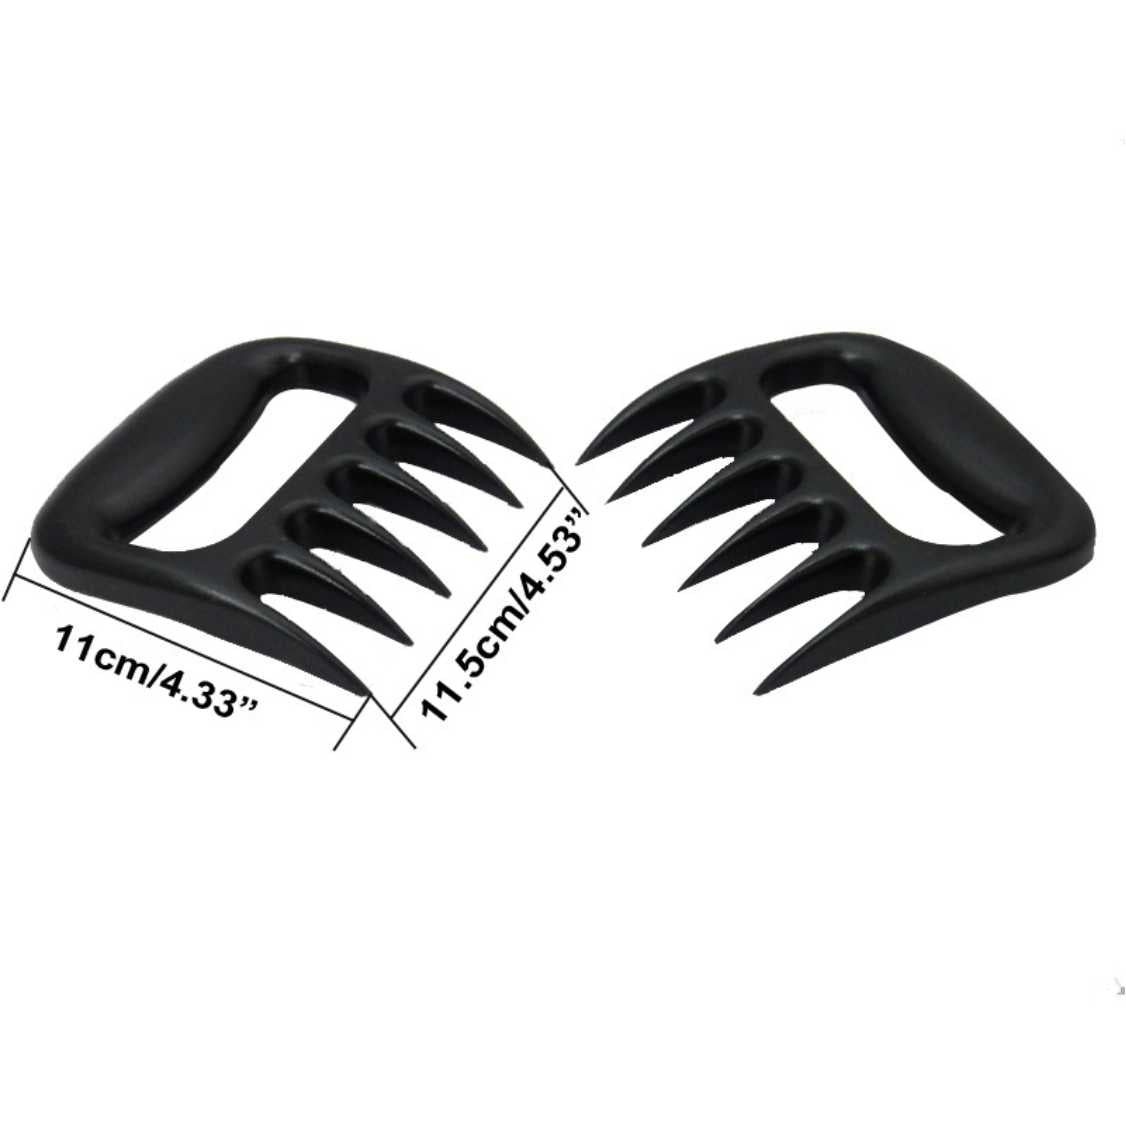 BBQ Meat Shredder Meat Claws - Referdeal